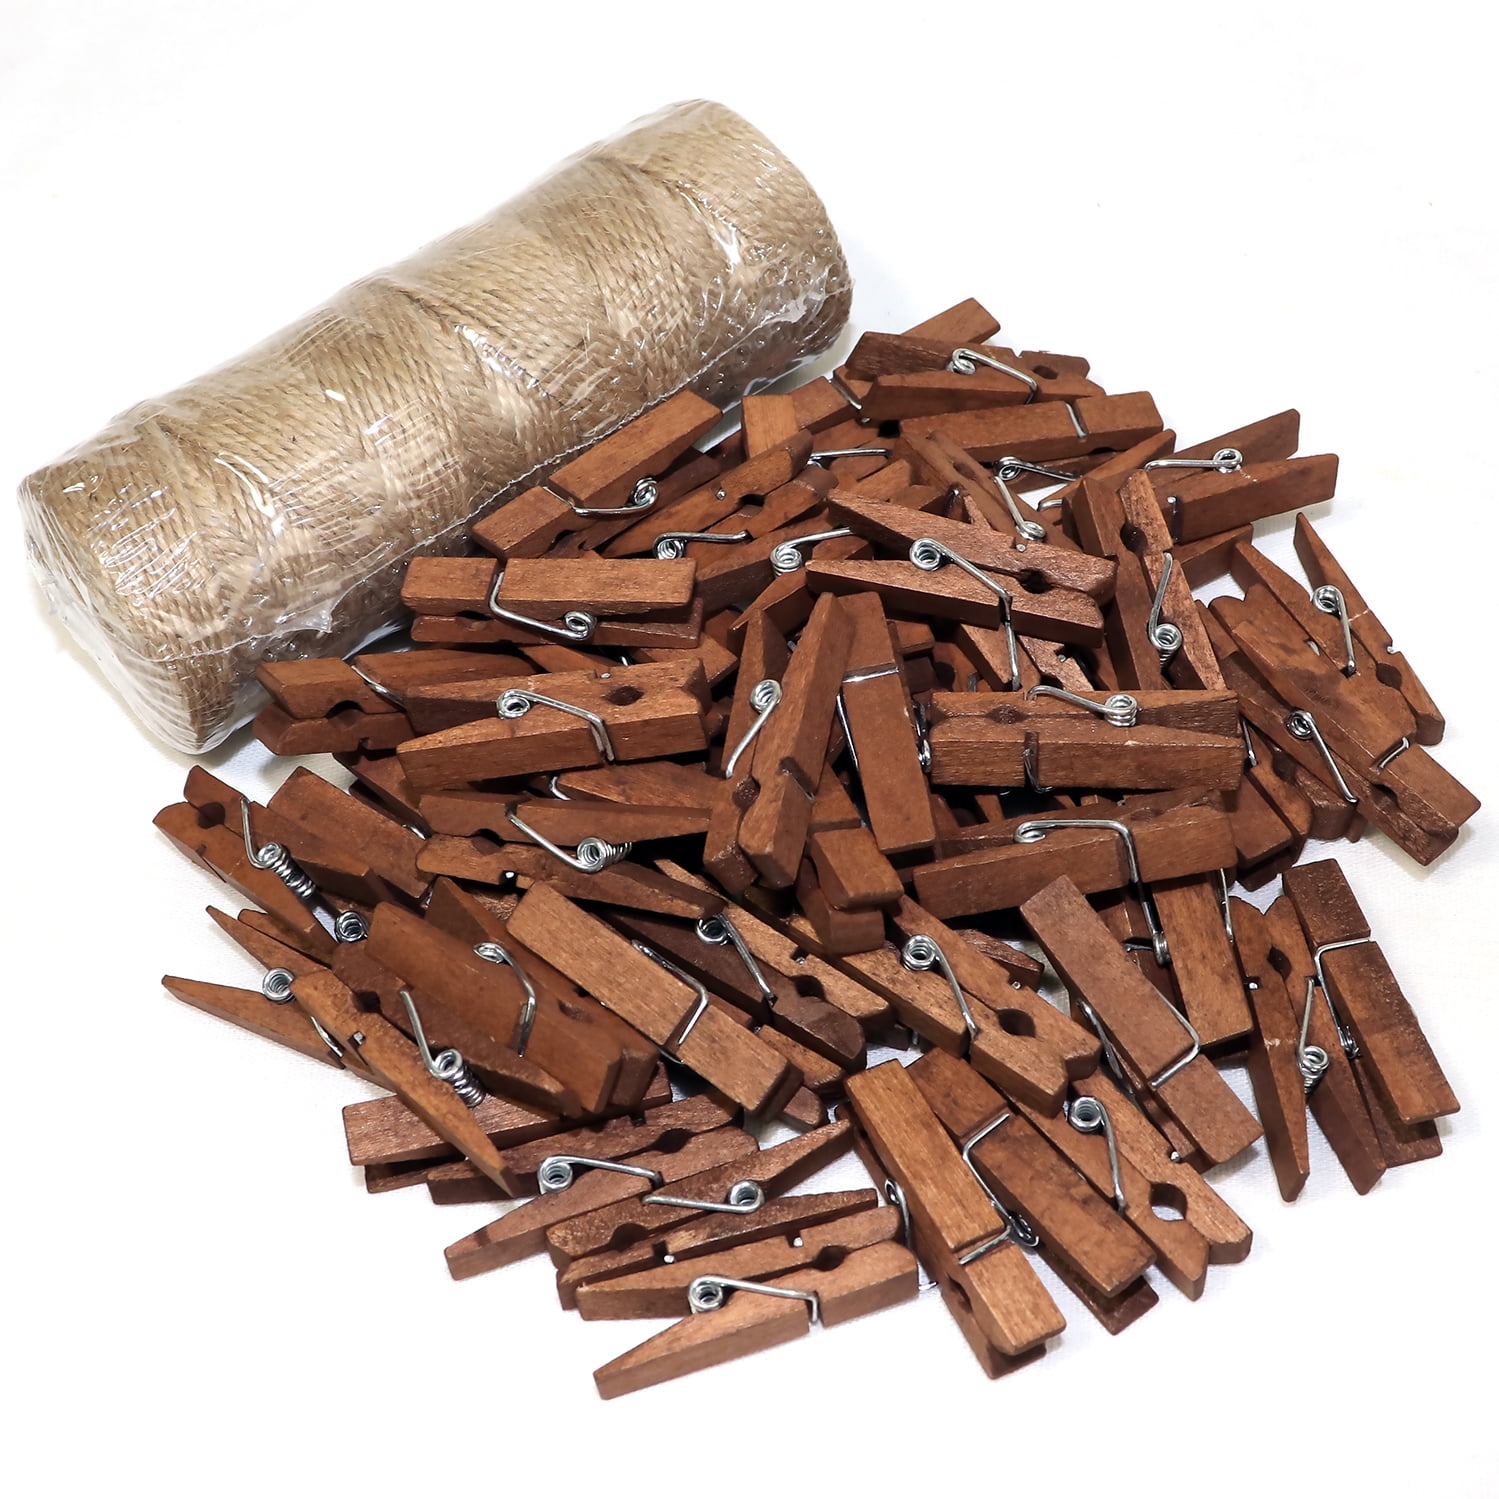 Wddeevoi Mini Clothes Pins, 260 Pcs Small Wooden Clothes Pins with Jute Twine, Clothespins, Clothes Pins for Photos Crafts DIY Project